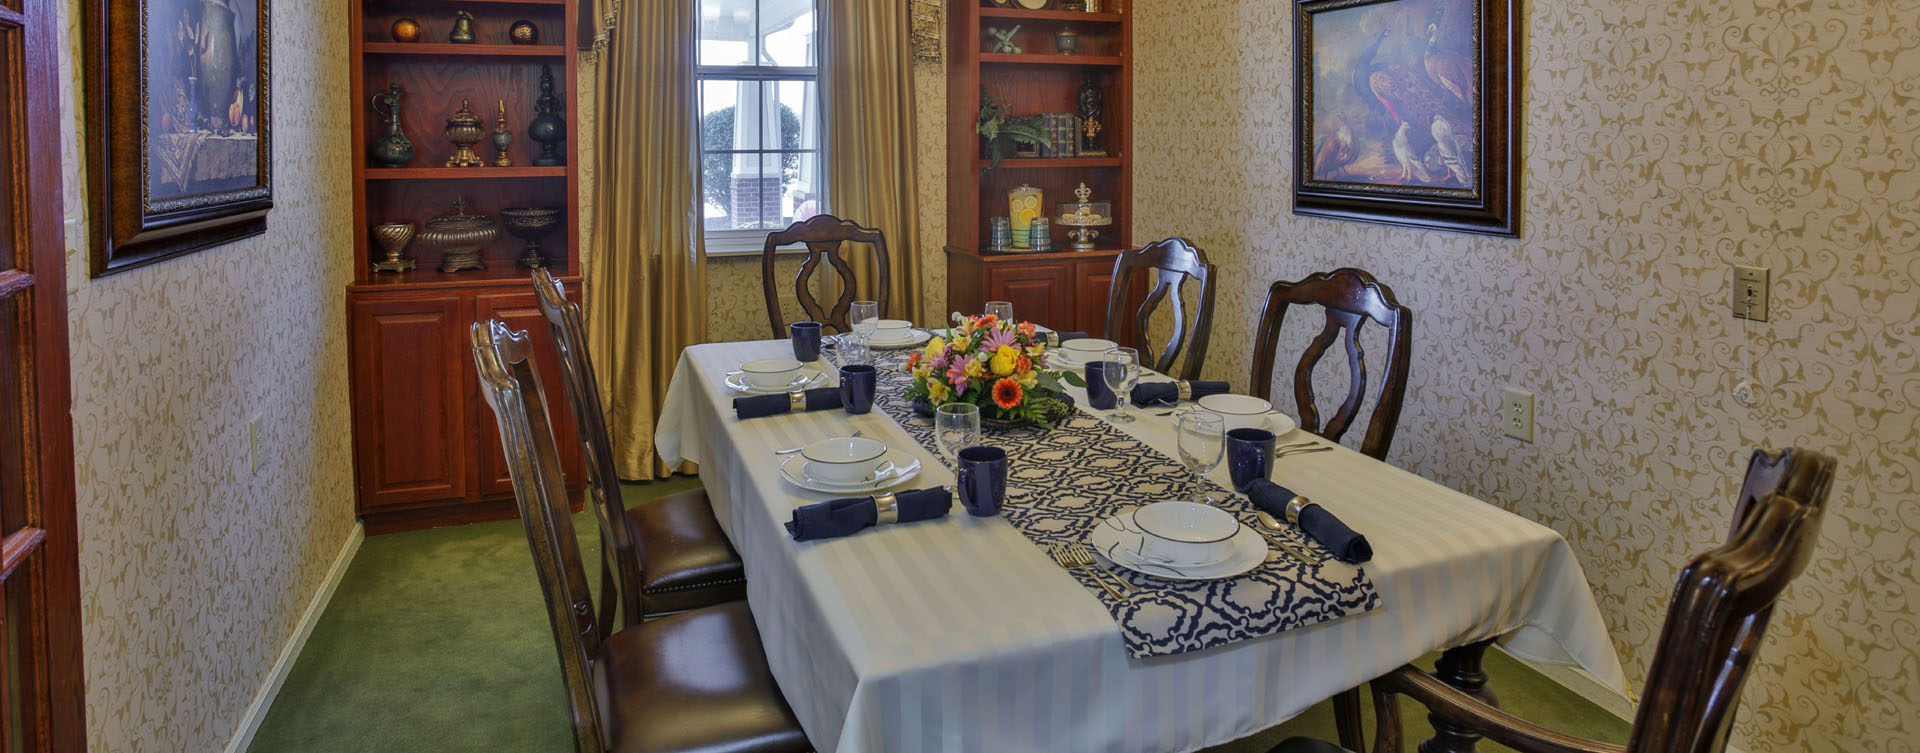 Food is best when shared with family and friends in the private dining room at Bickford of Lafayette